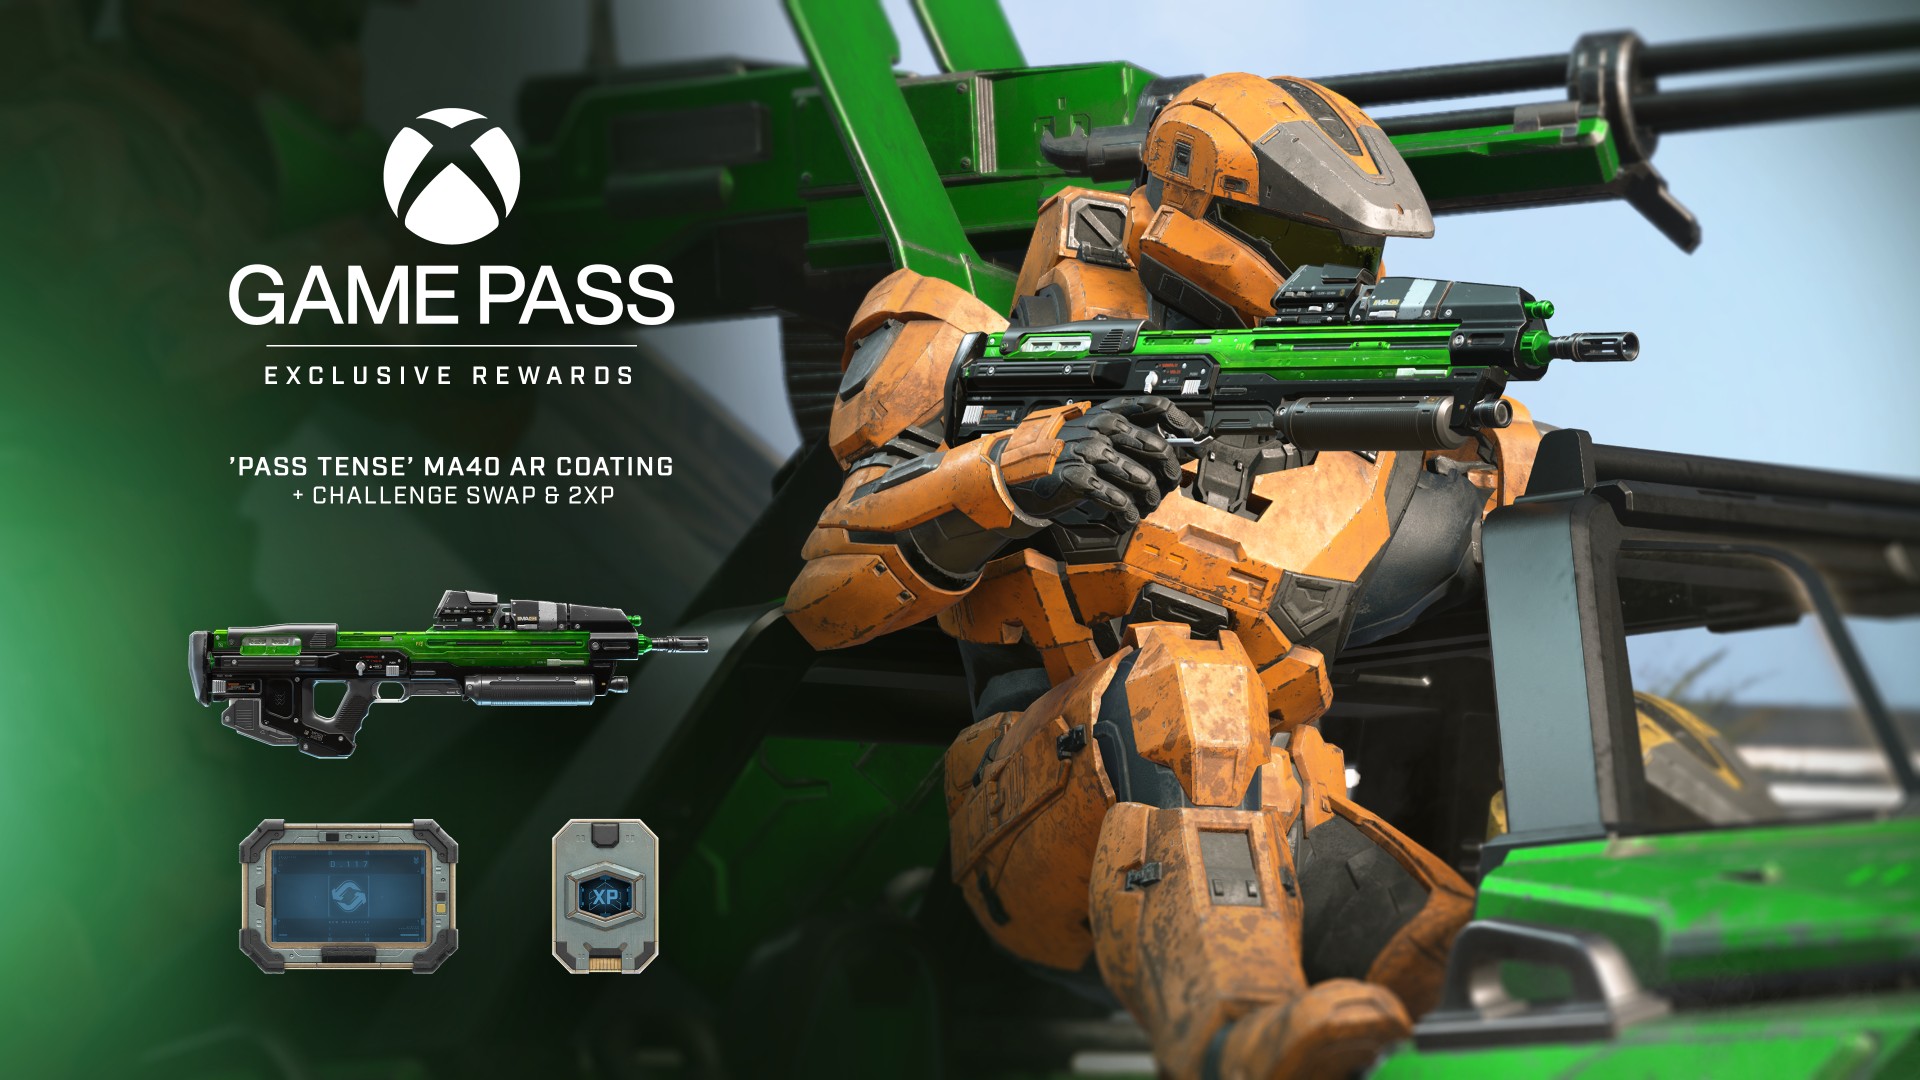 Games coming to Xbox Game Pass PC in December 2021: Stardew Valley, Halo  Infinite Campaign, One